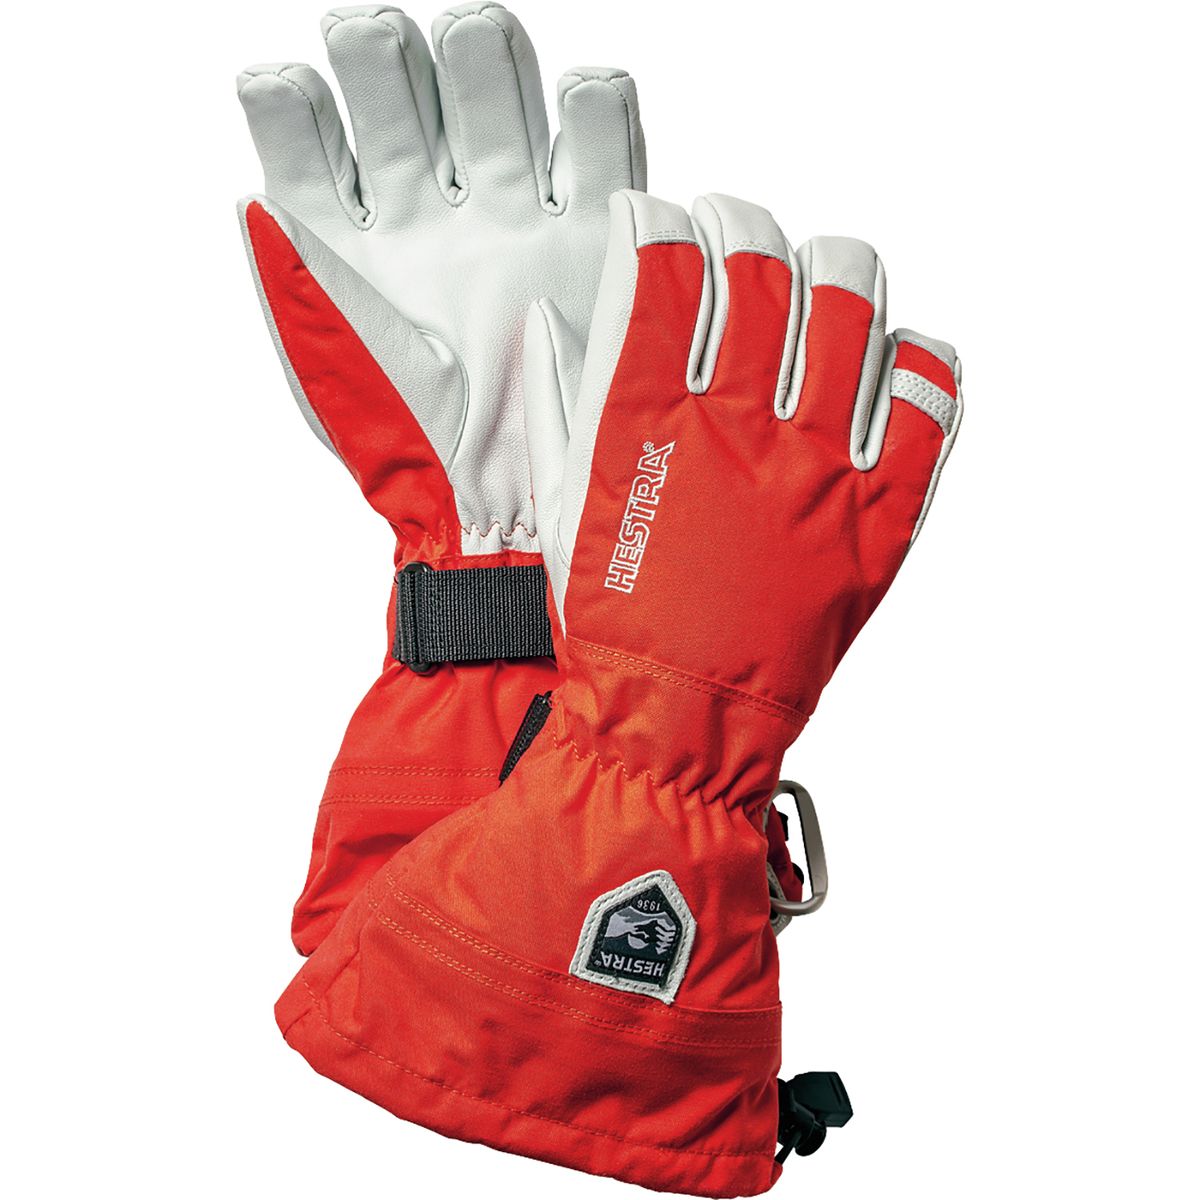 Hestra Leather Heli Ski and Ride Glove with Gauntlet